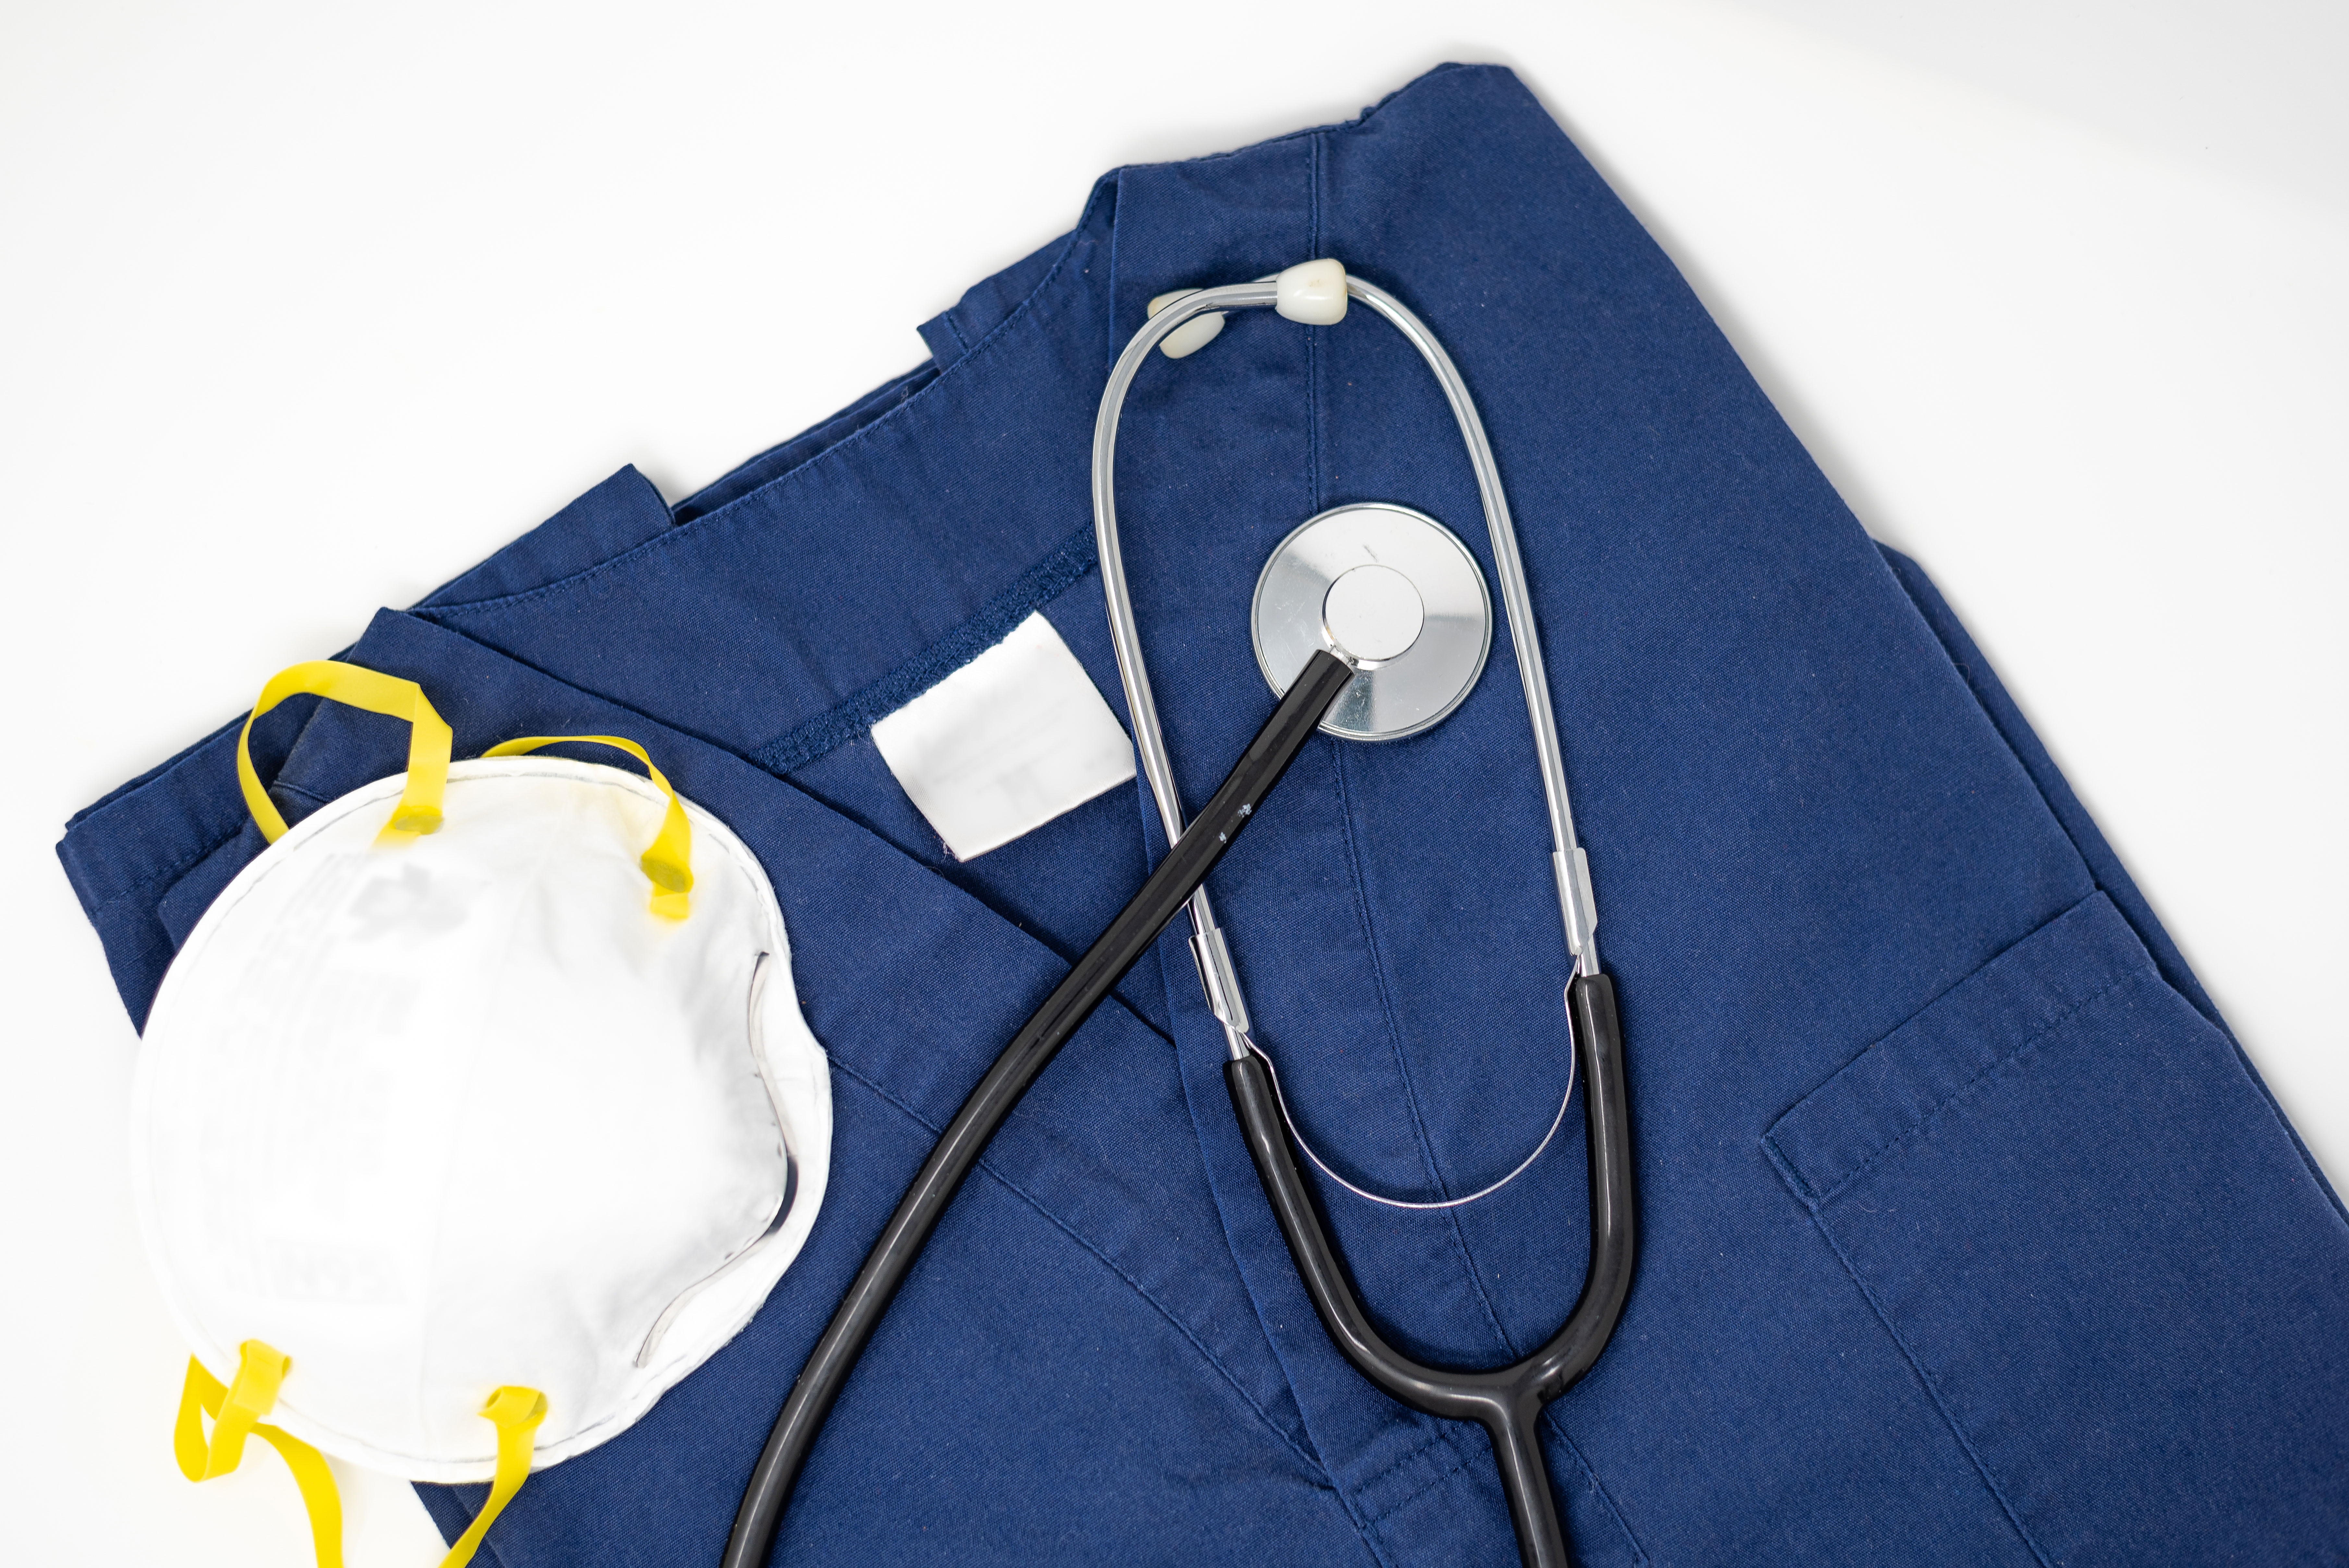 picture-of-medical-scrubs-a-stethoscope-and-a-n95-mask-shirtspace.jpg